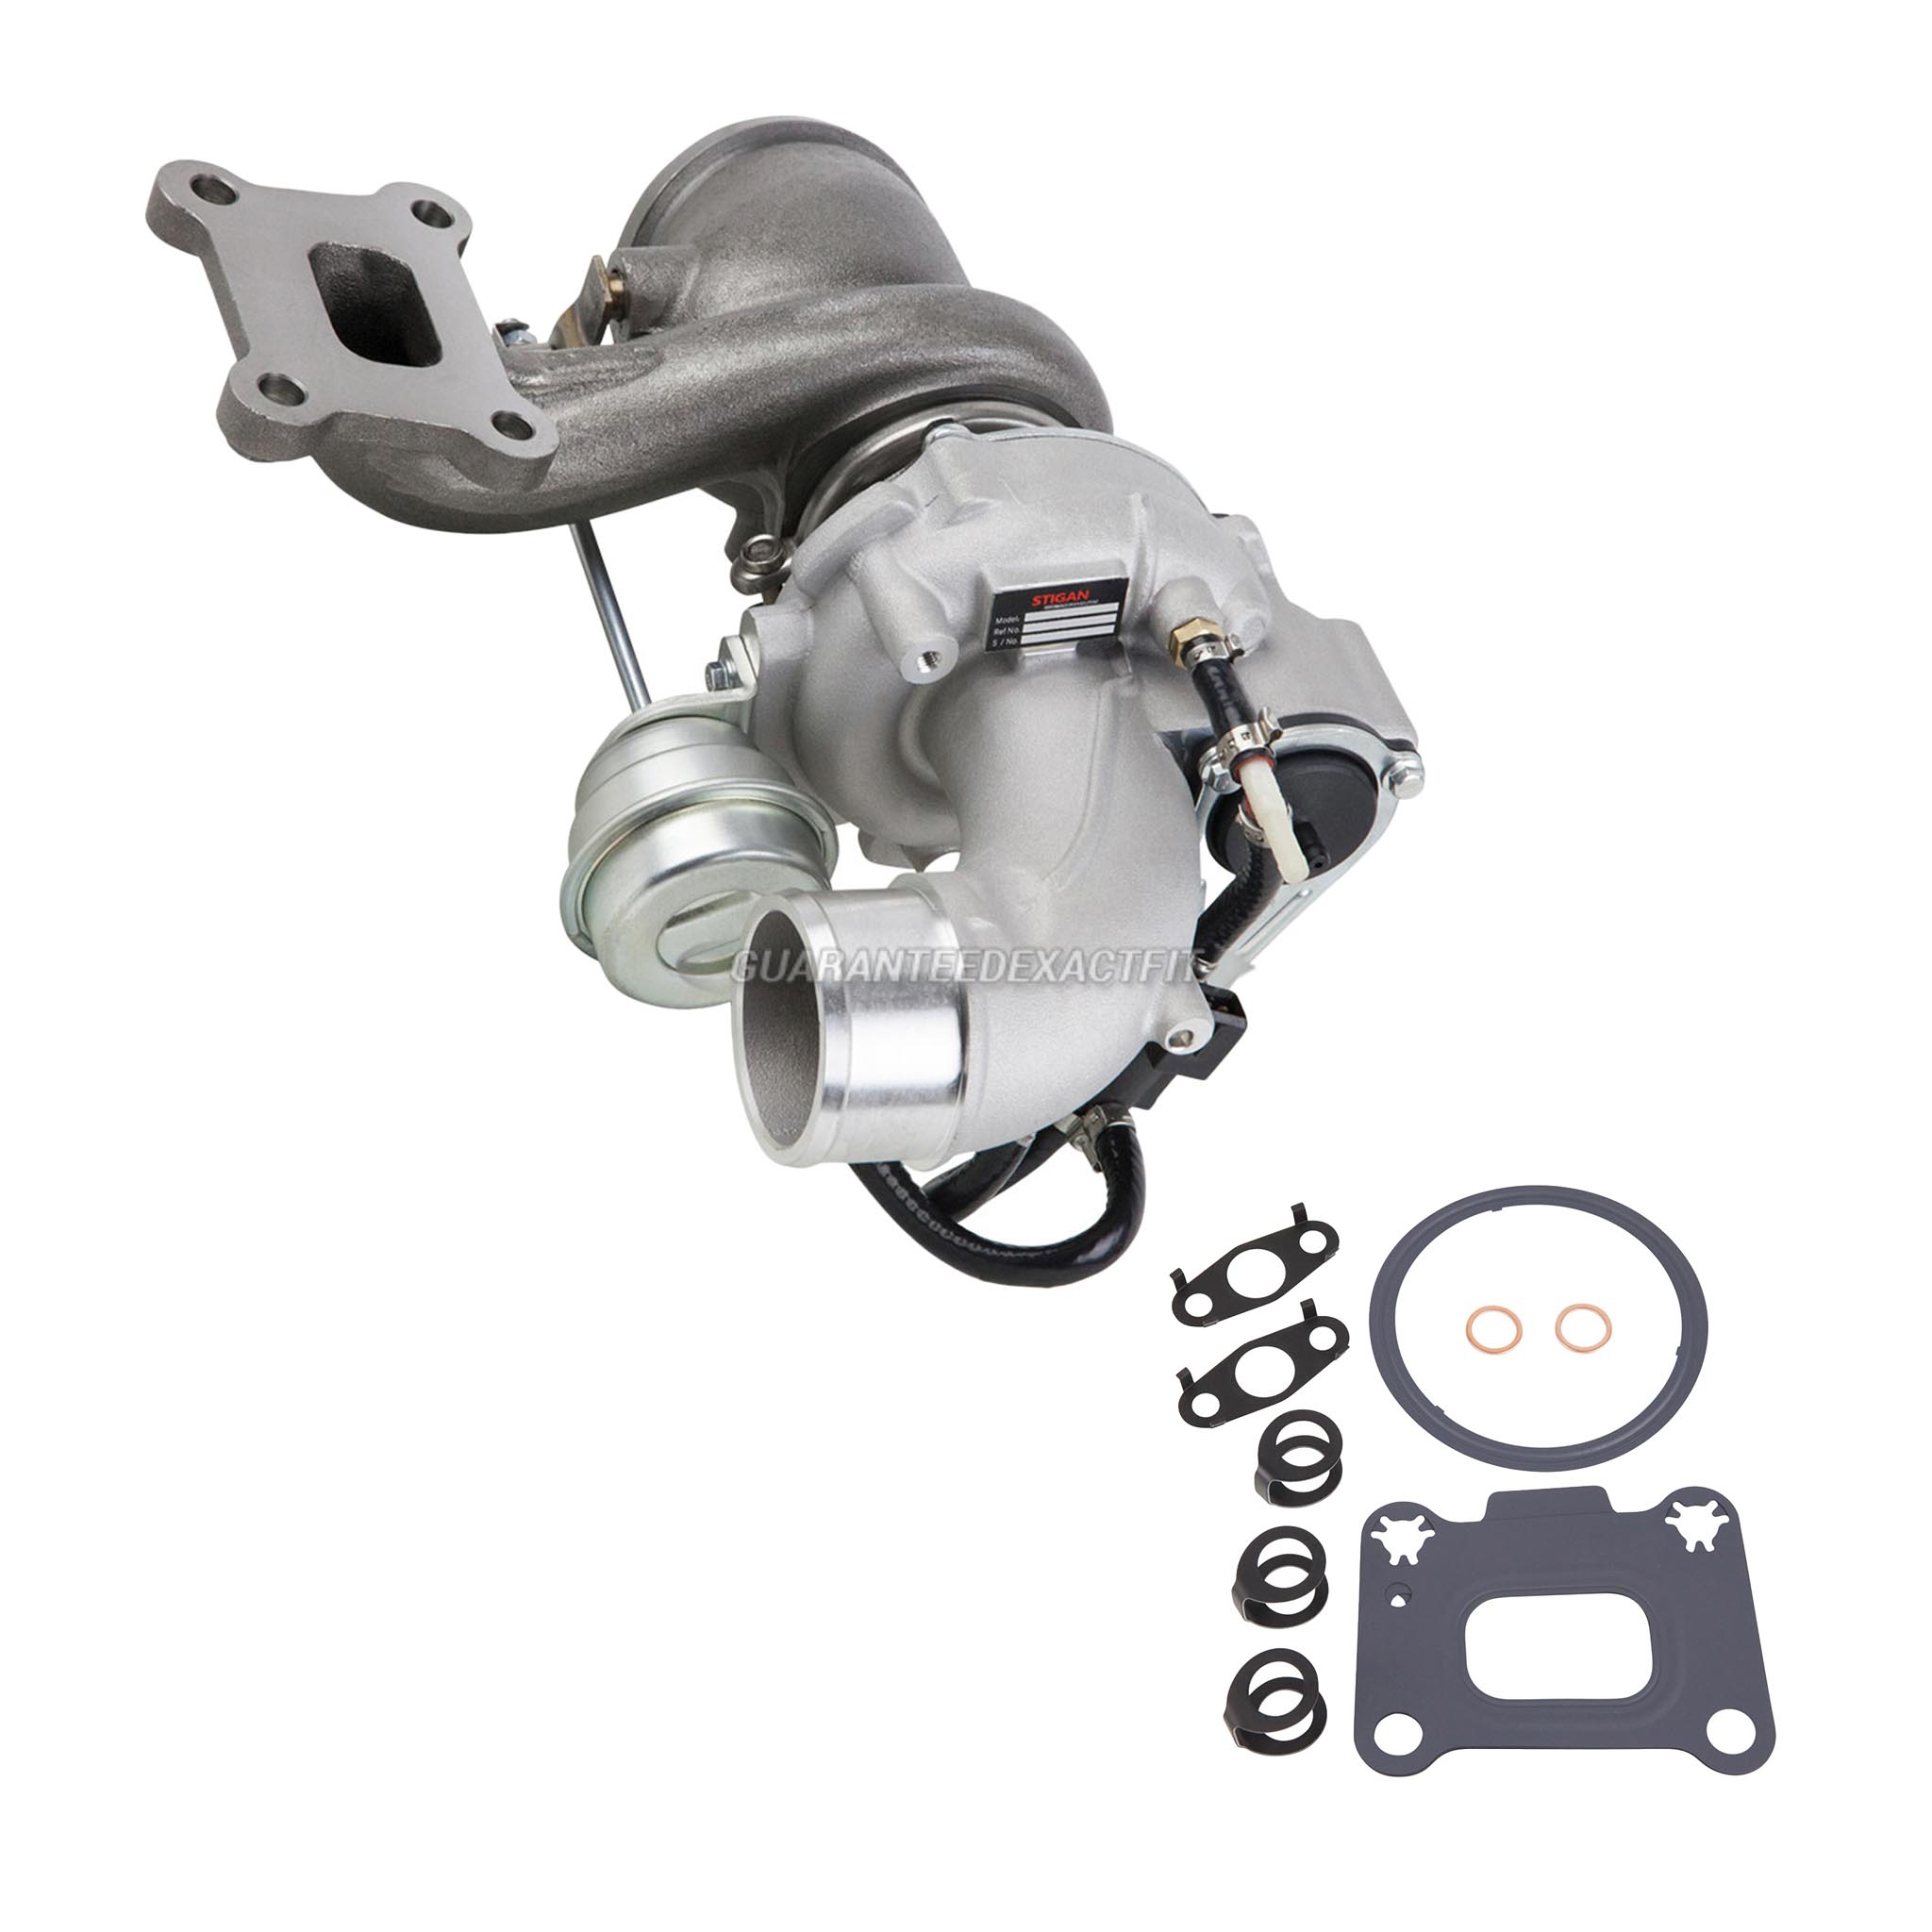 2013 Ford Fusion turbocharger and installation accessory kit 